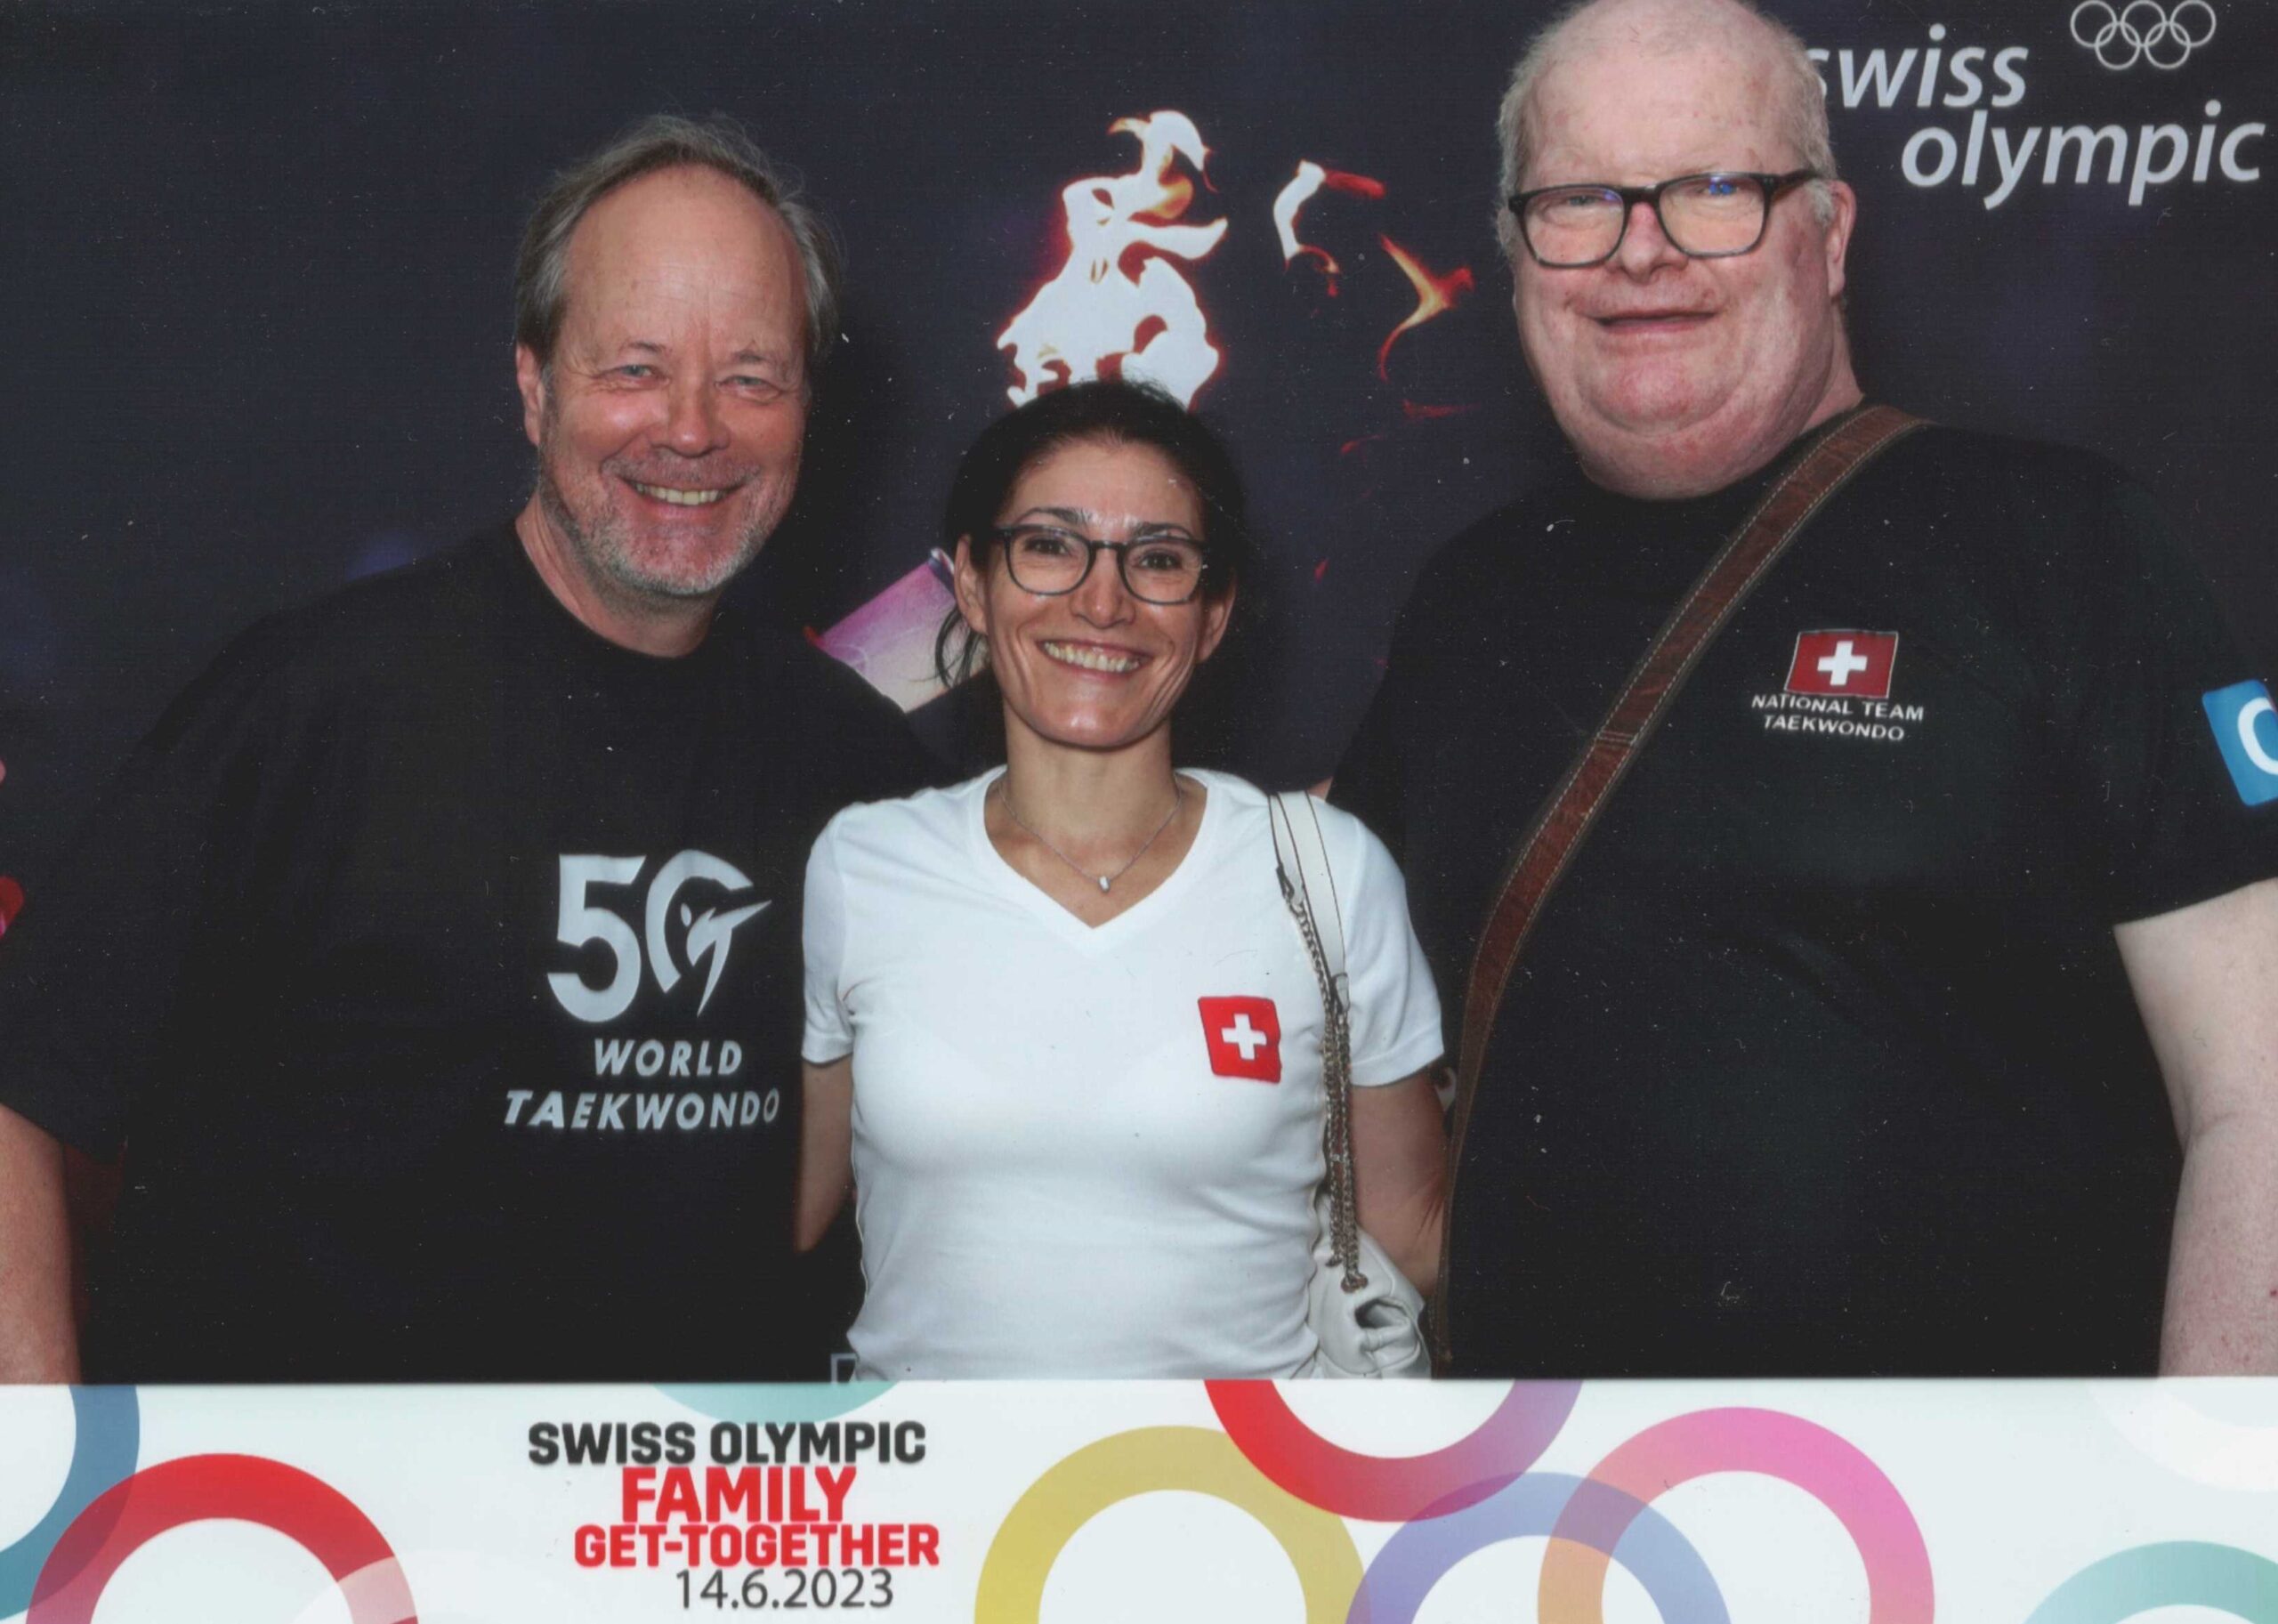 Swiss Olympic Family Get-together 2023